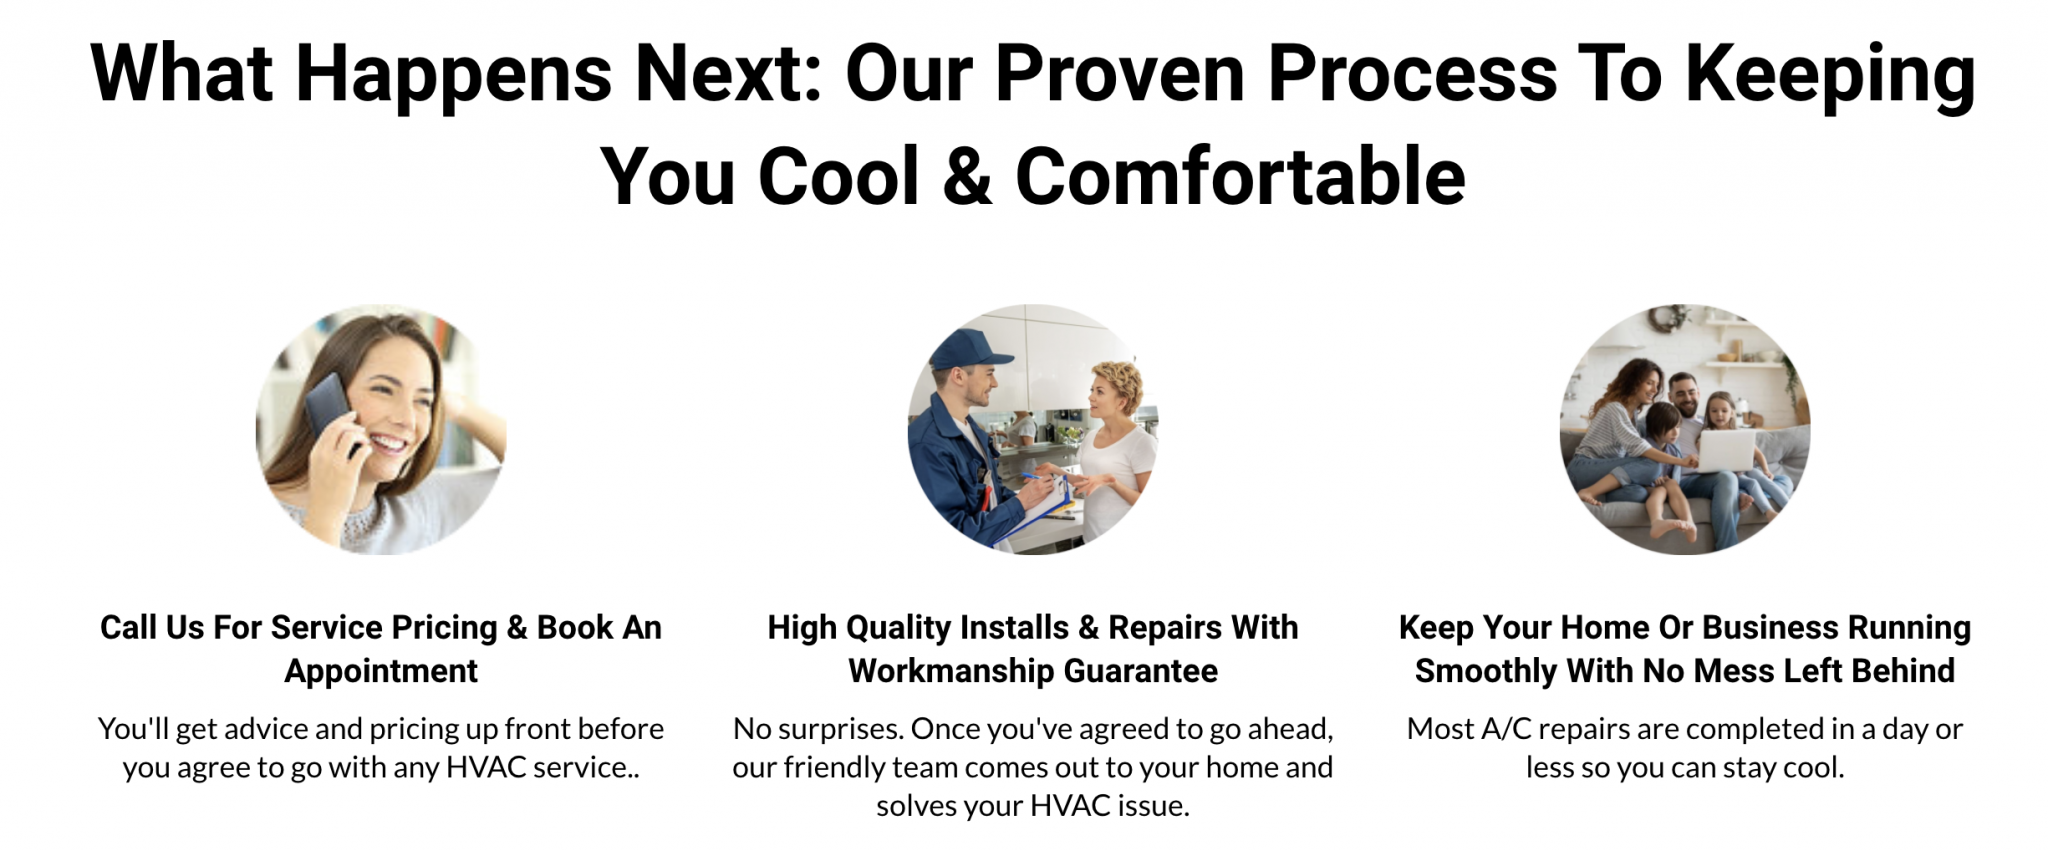 Image-showing-steps-when-getting-HVAC-service-from-a-company-2048x851